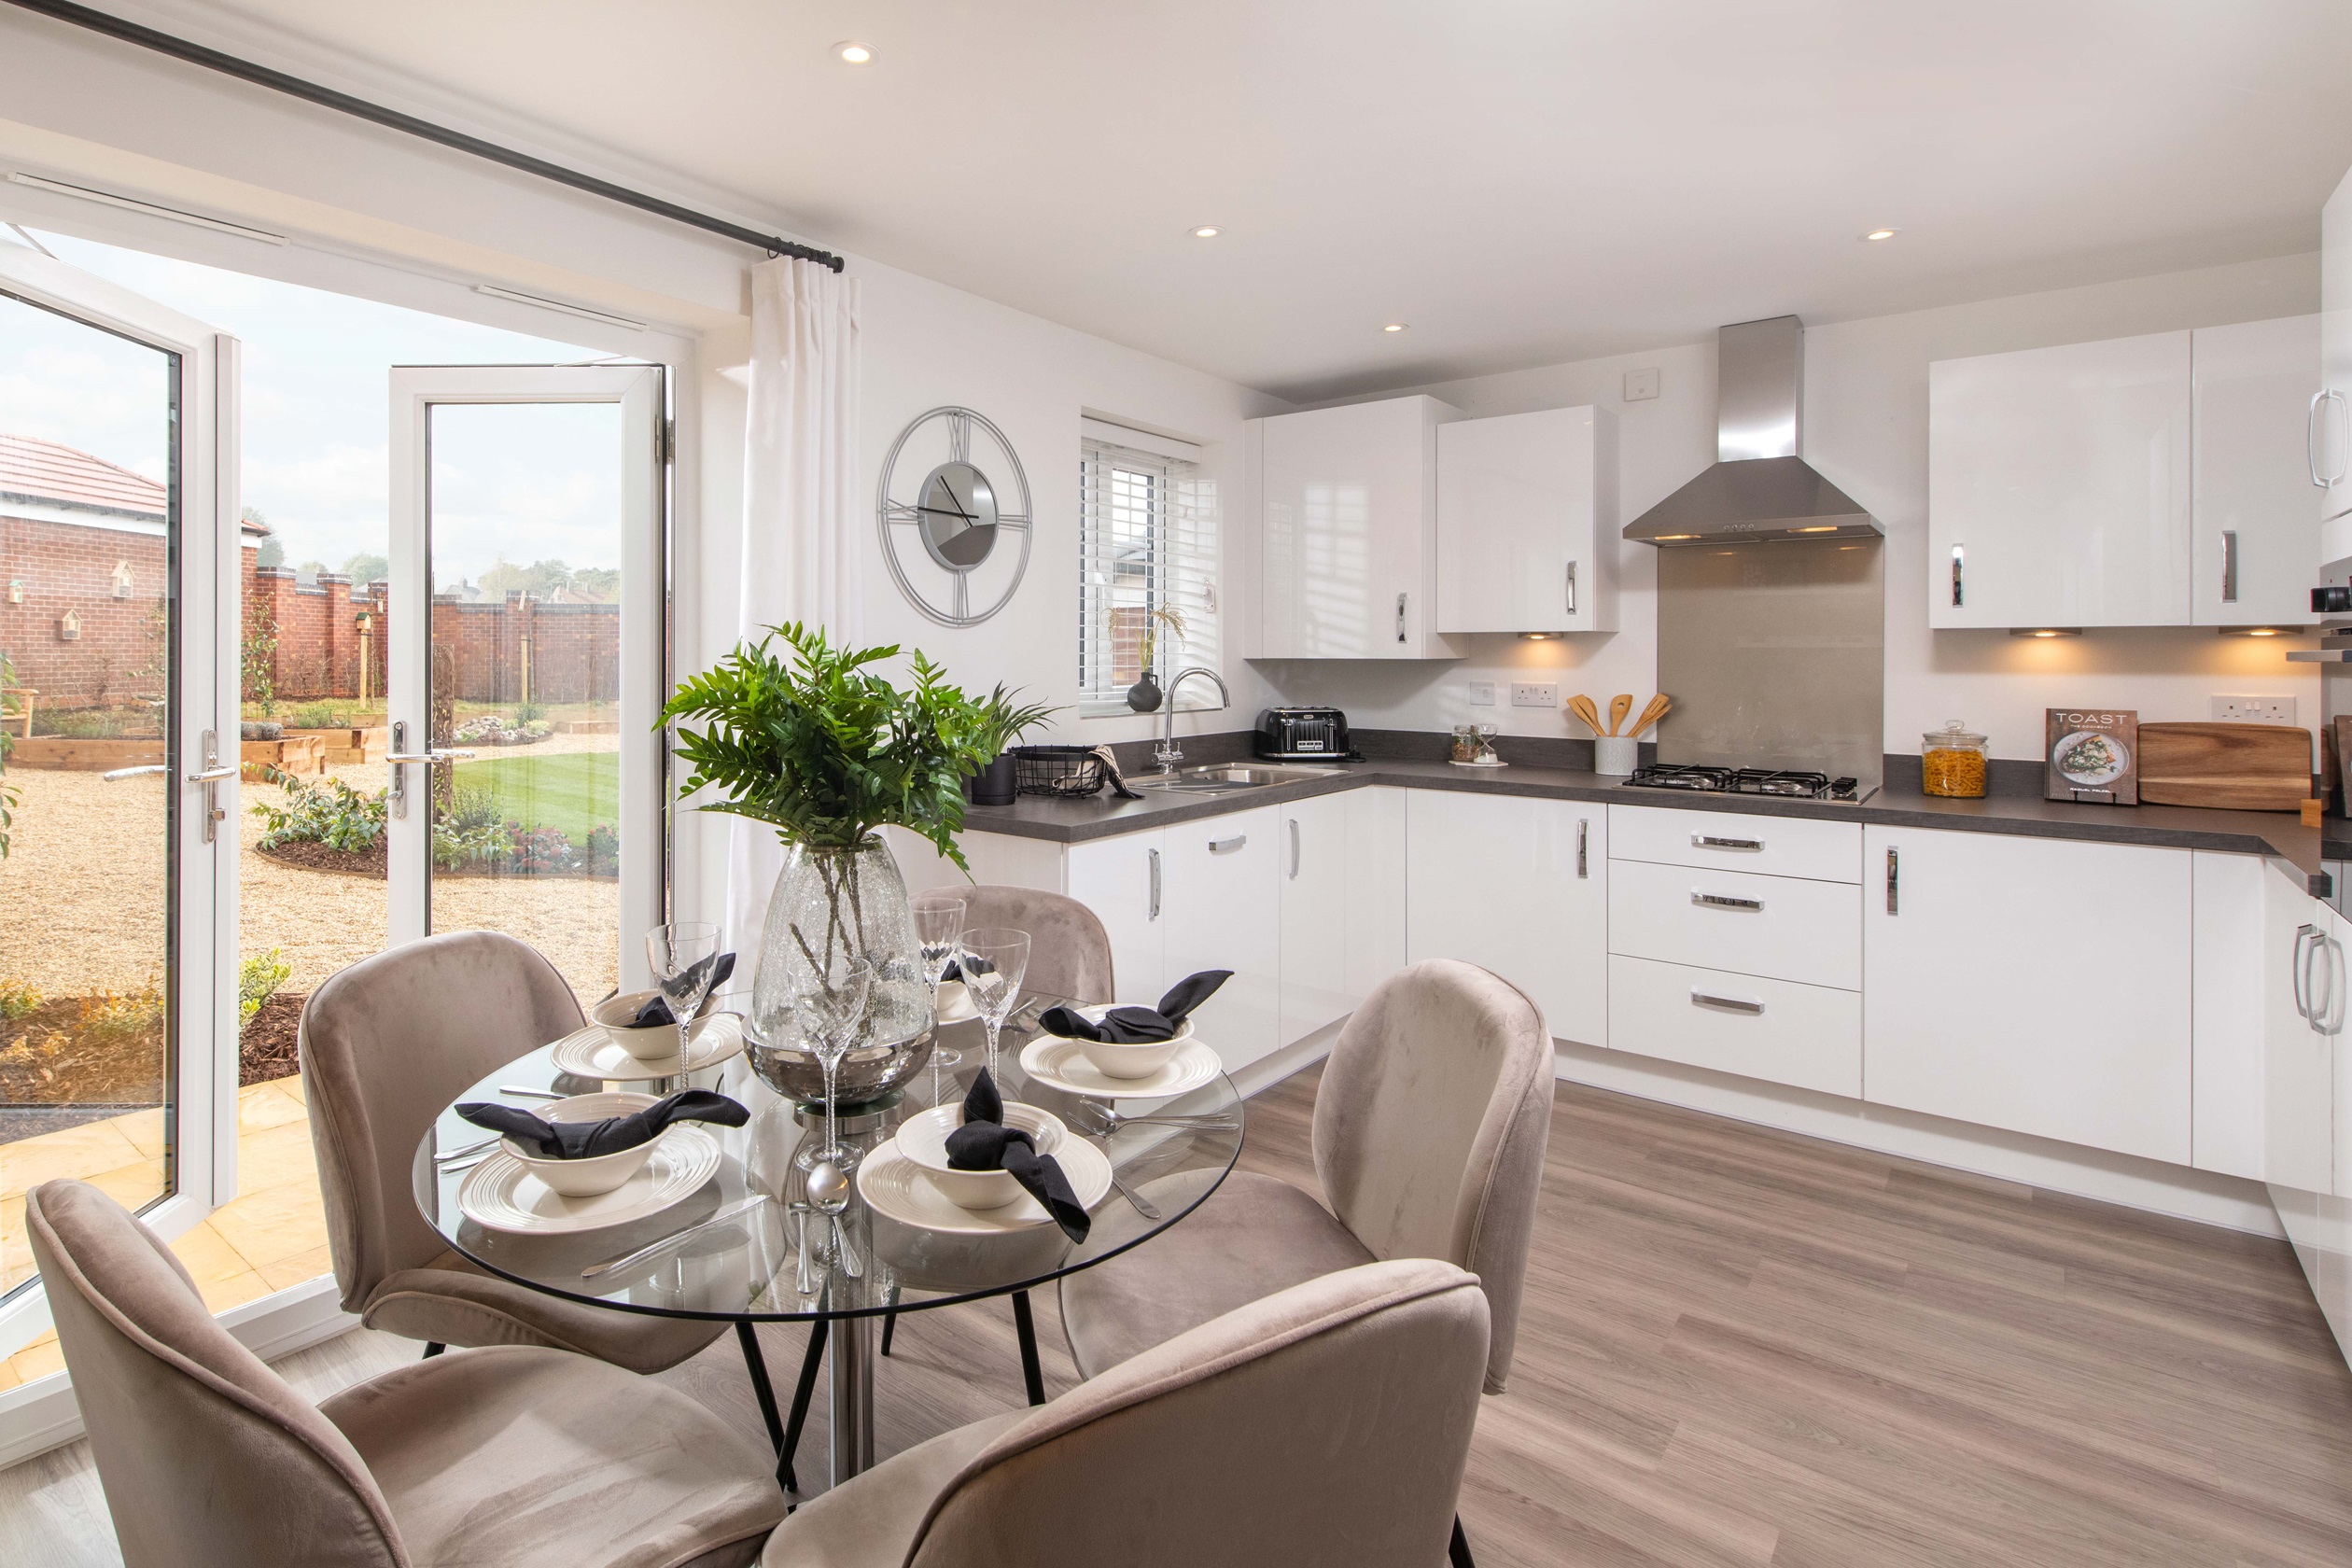 Property 3 of 7. Dwh Kennett Kitchen-Diner With French Doors